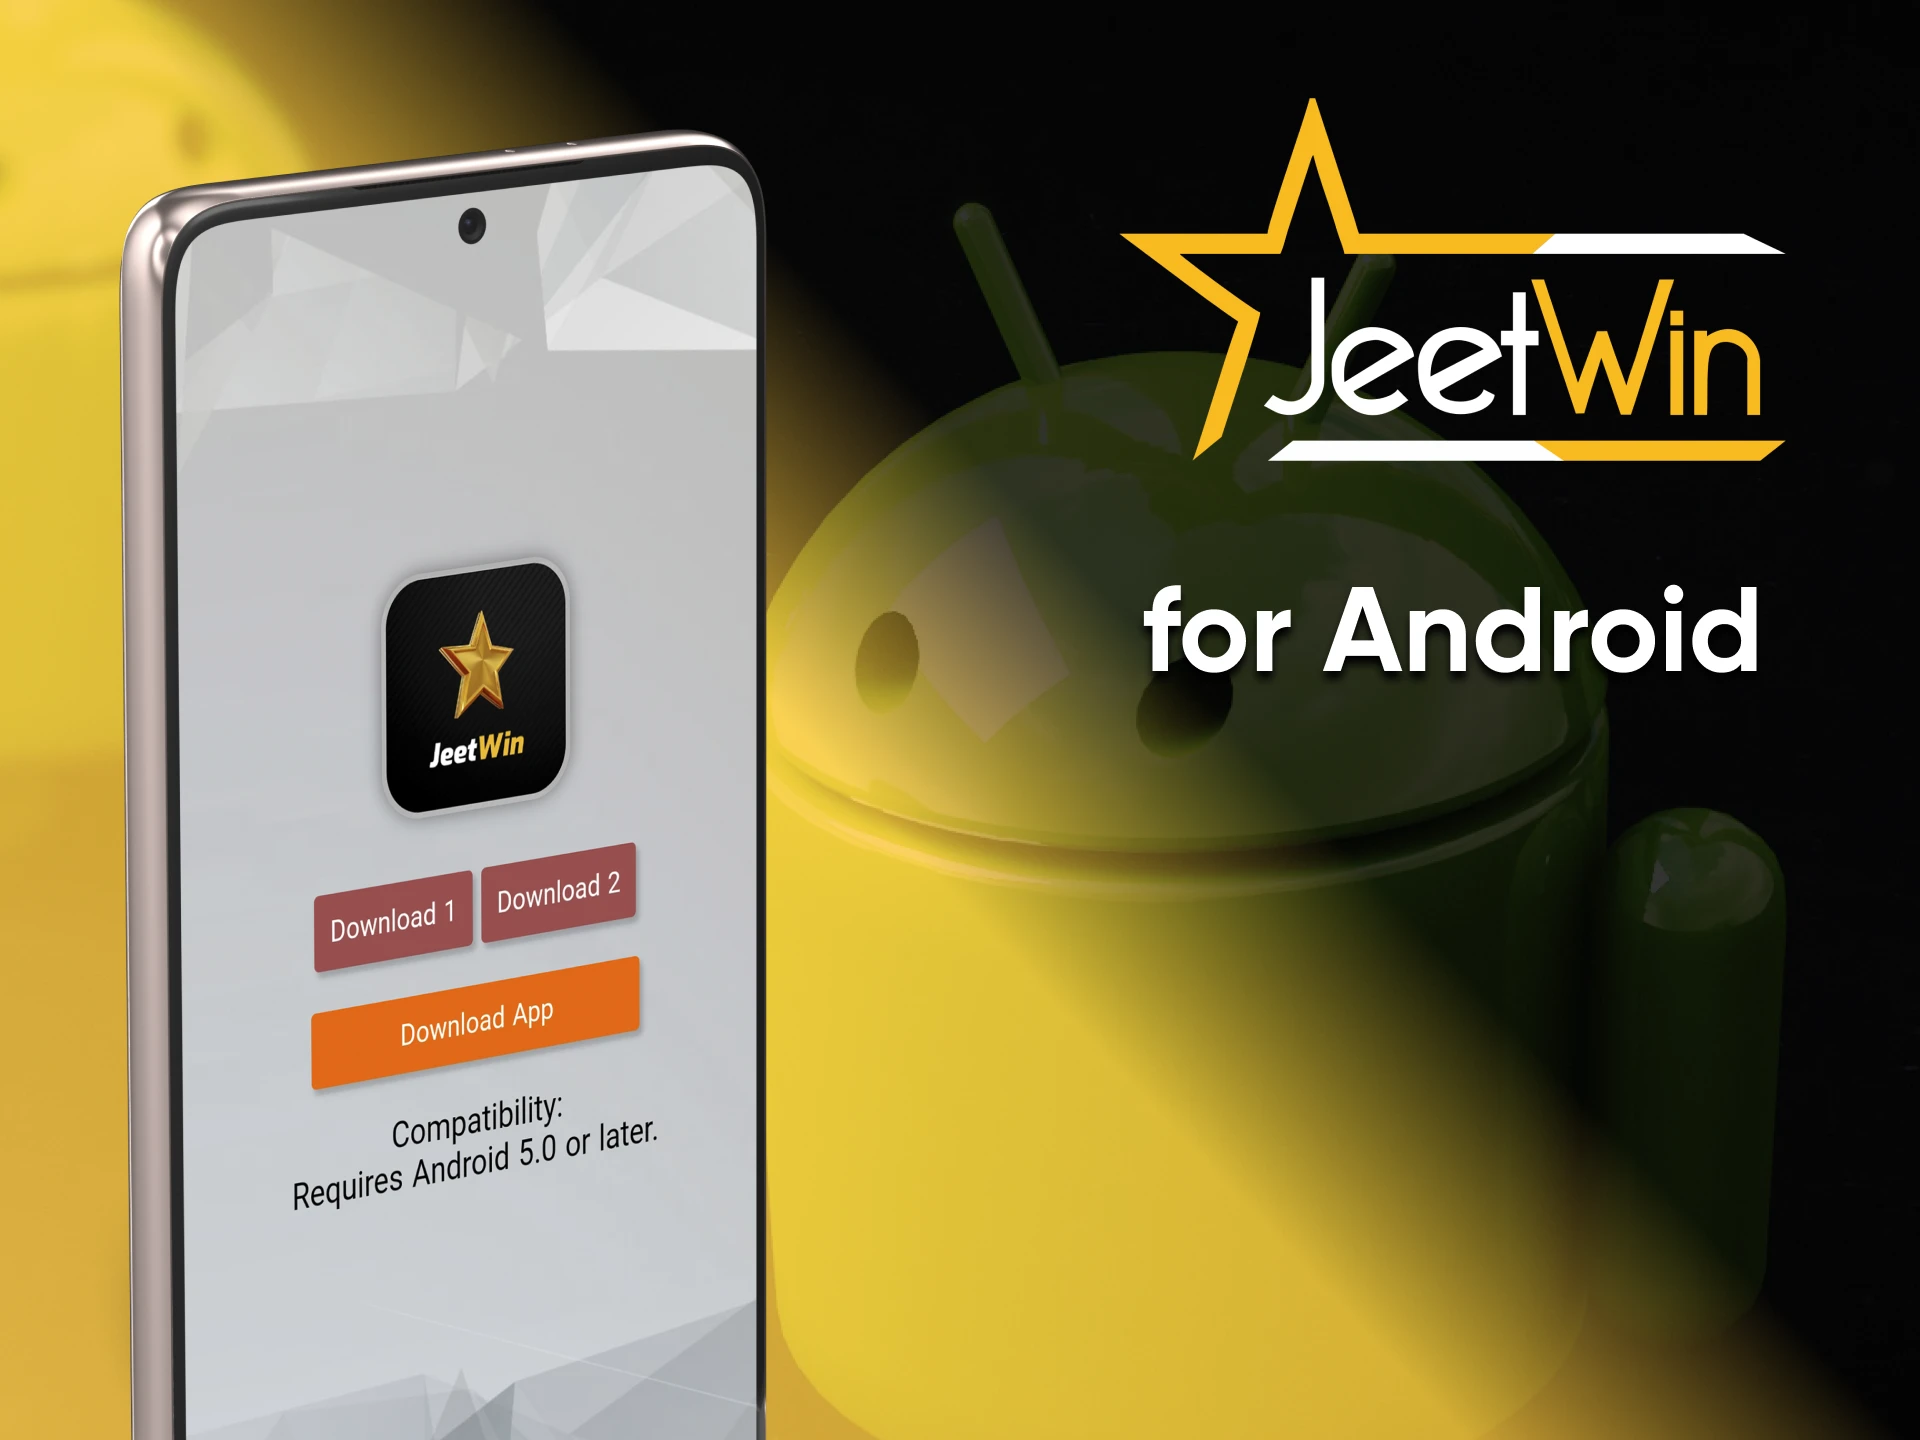 Download the Jeetwin app for android platform.